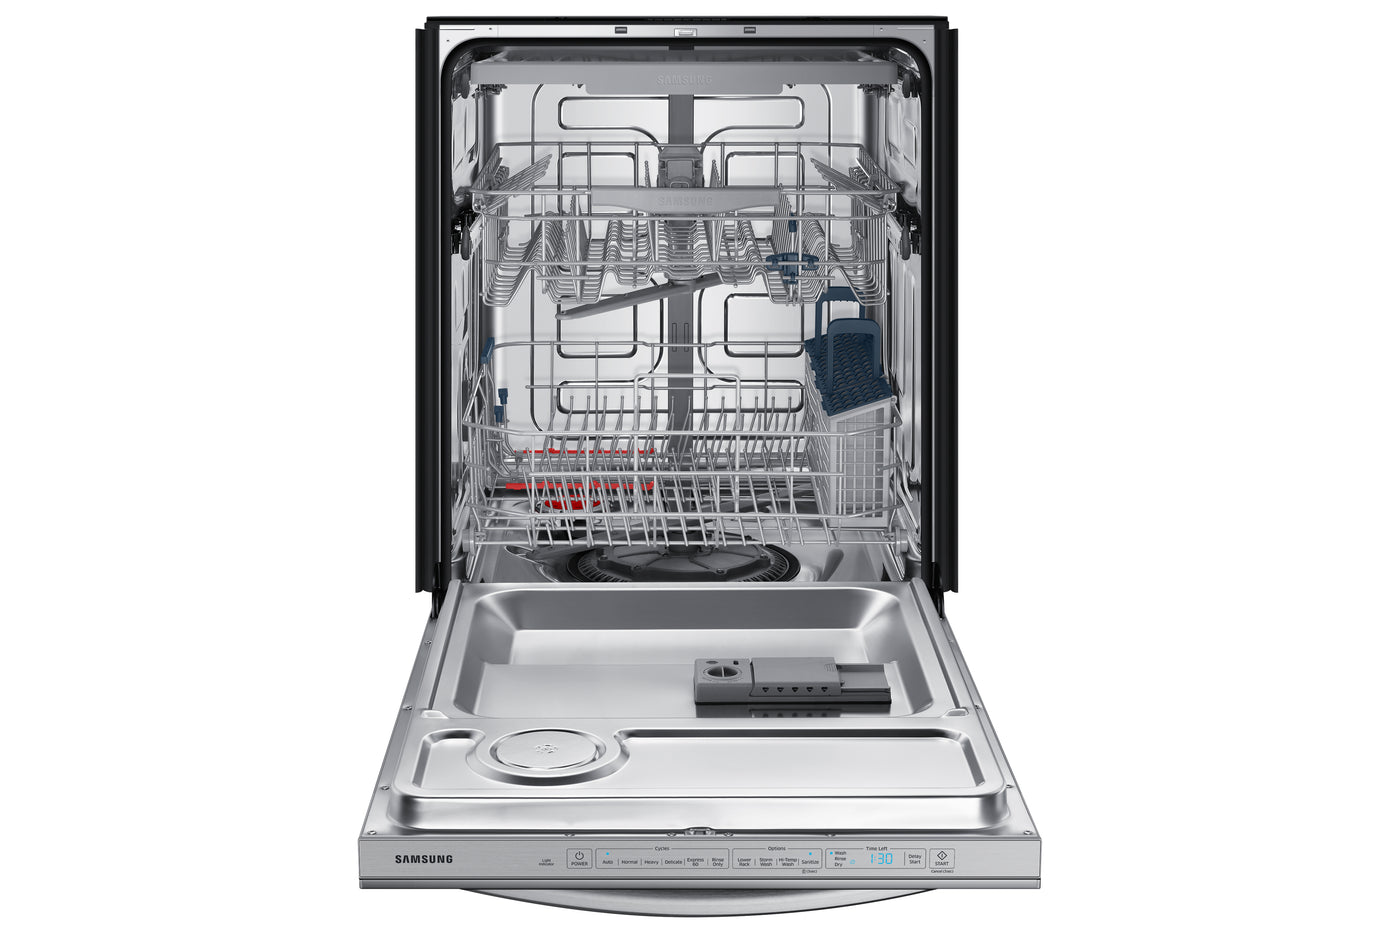 Samsung Finger Print Resistant Stainless Steel Tall Tub Built-In Dishwasher - DW80R5061US/AA